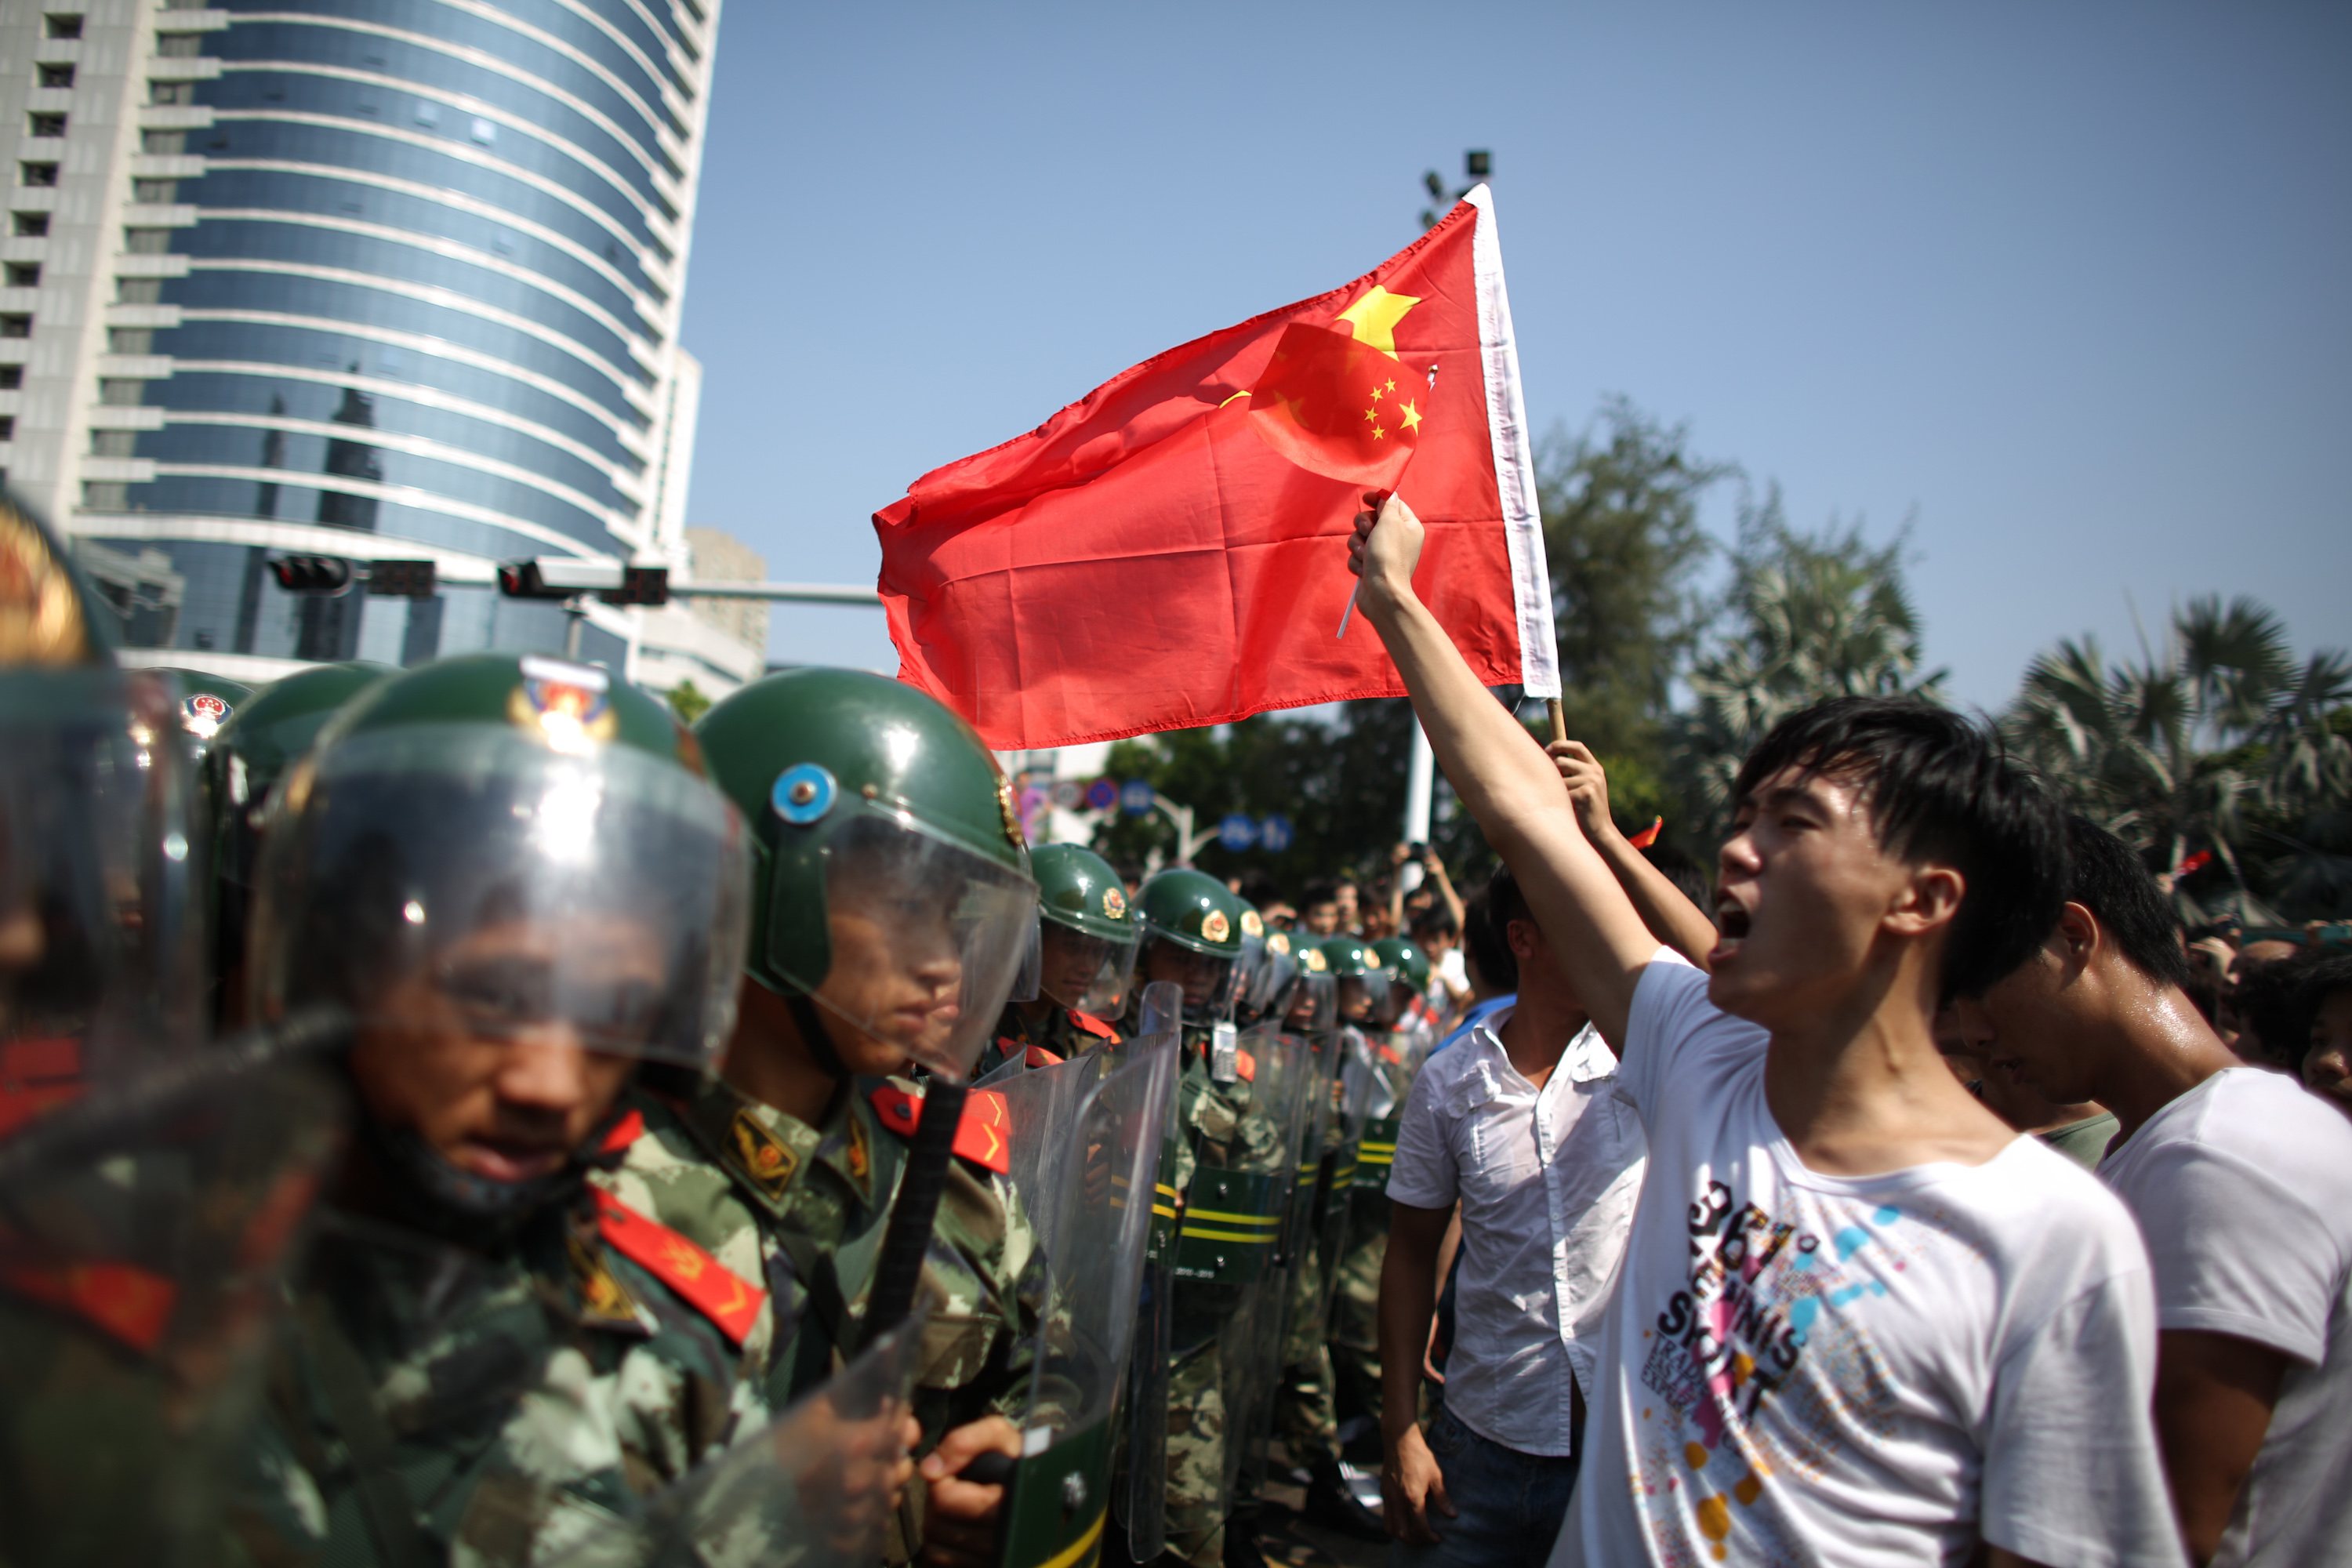 Anti-Japan protesters are confronted by police as they demonstrate over the disputed Diaoyu/Senkaku Islands on Sept. 16, 2012, in Shenzhen (Lam Yik Fei—Getty Images)